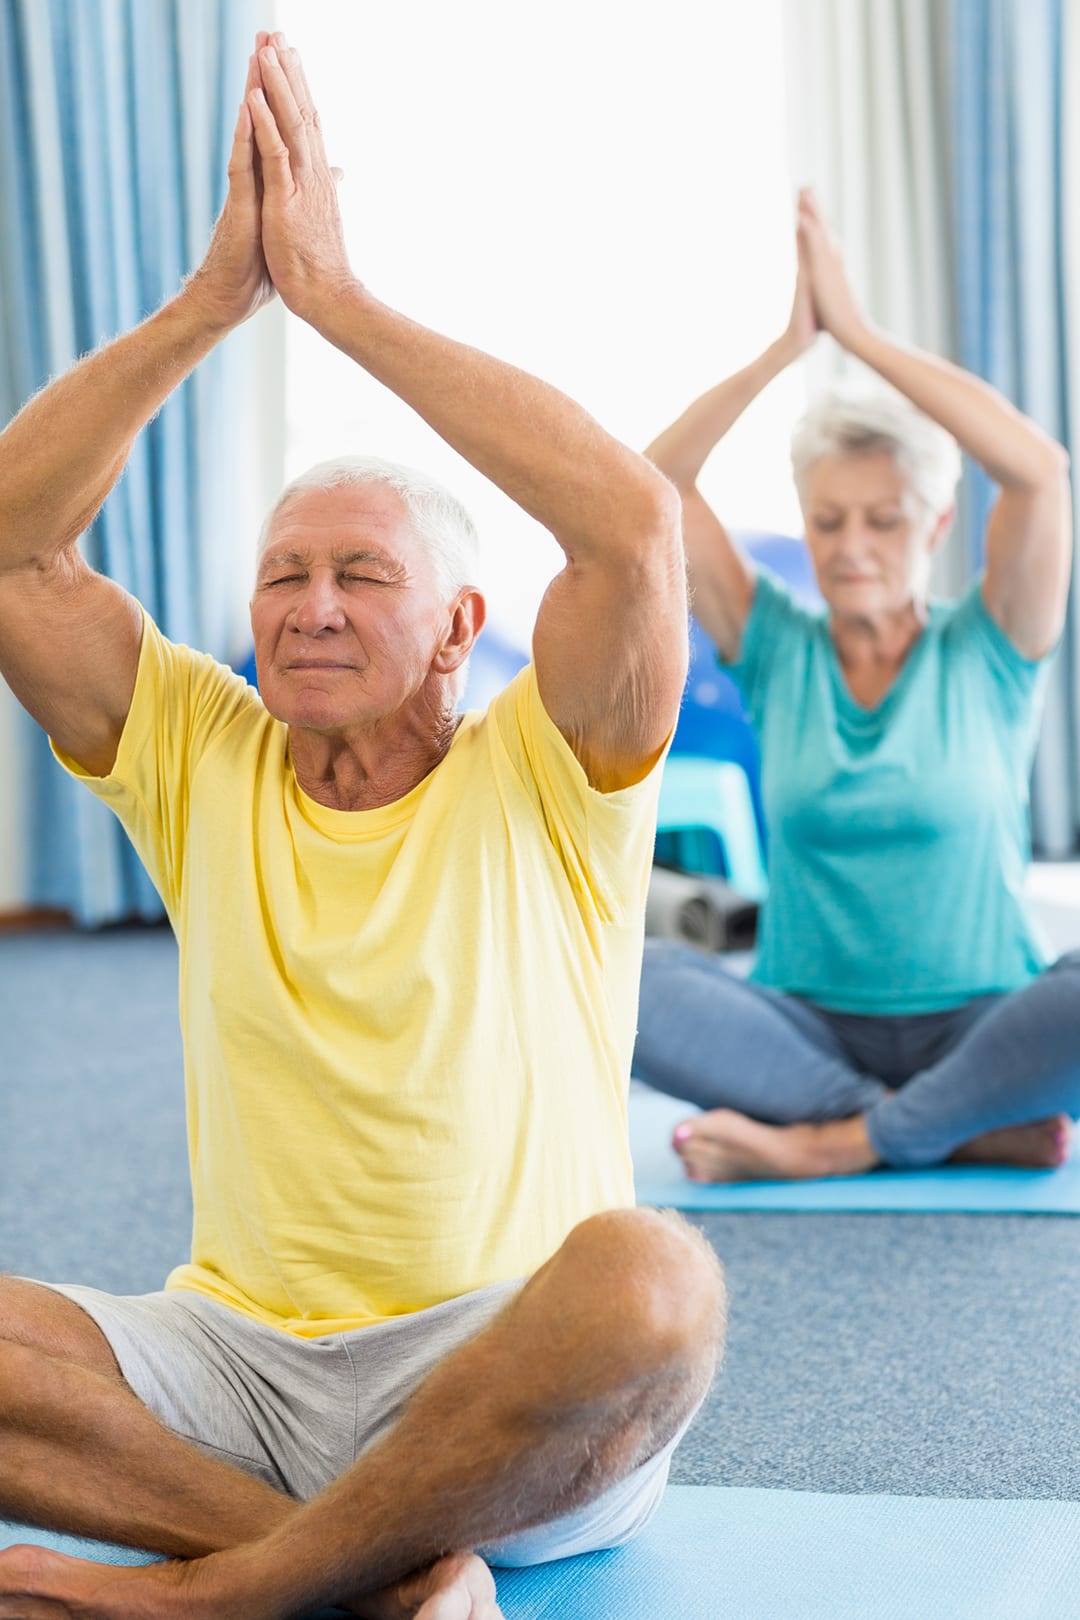 Yoga Poses for Seniors - Home Help for Seniors, Senior Home Care Helping  Seniors Live Well at Home | Home Care Powered by AUAF